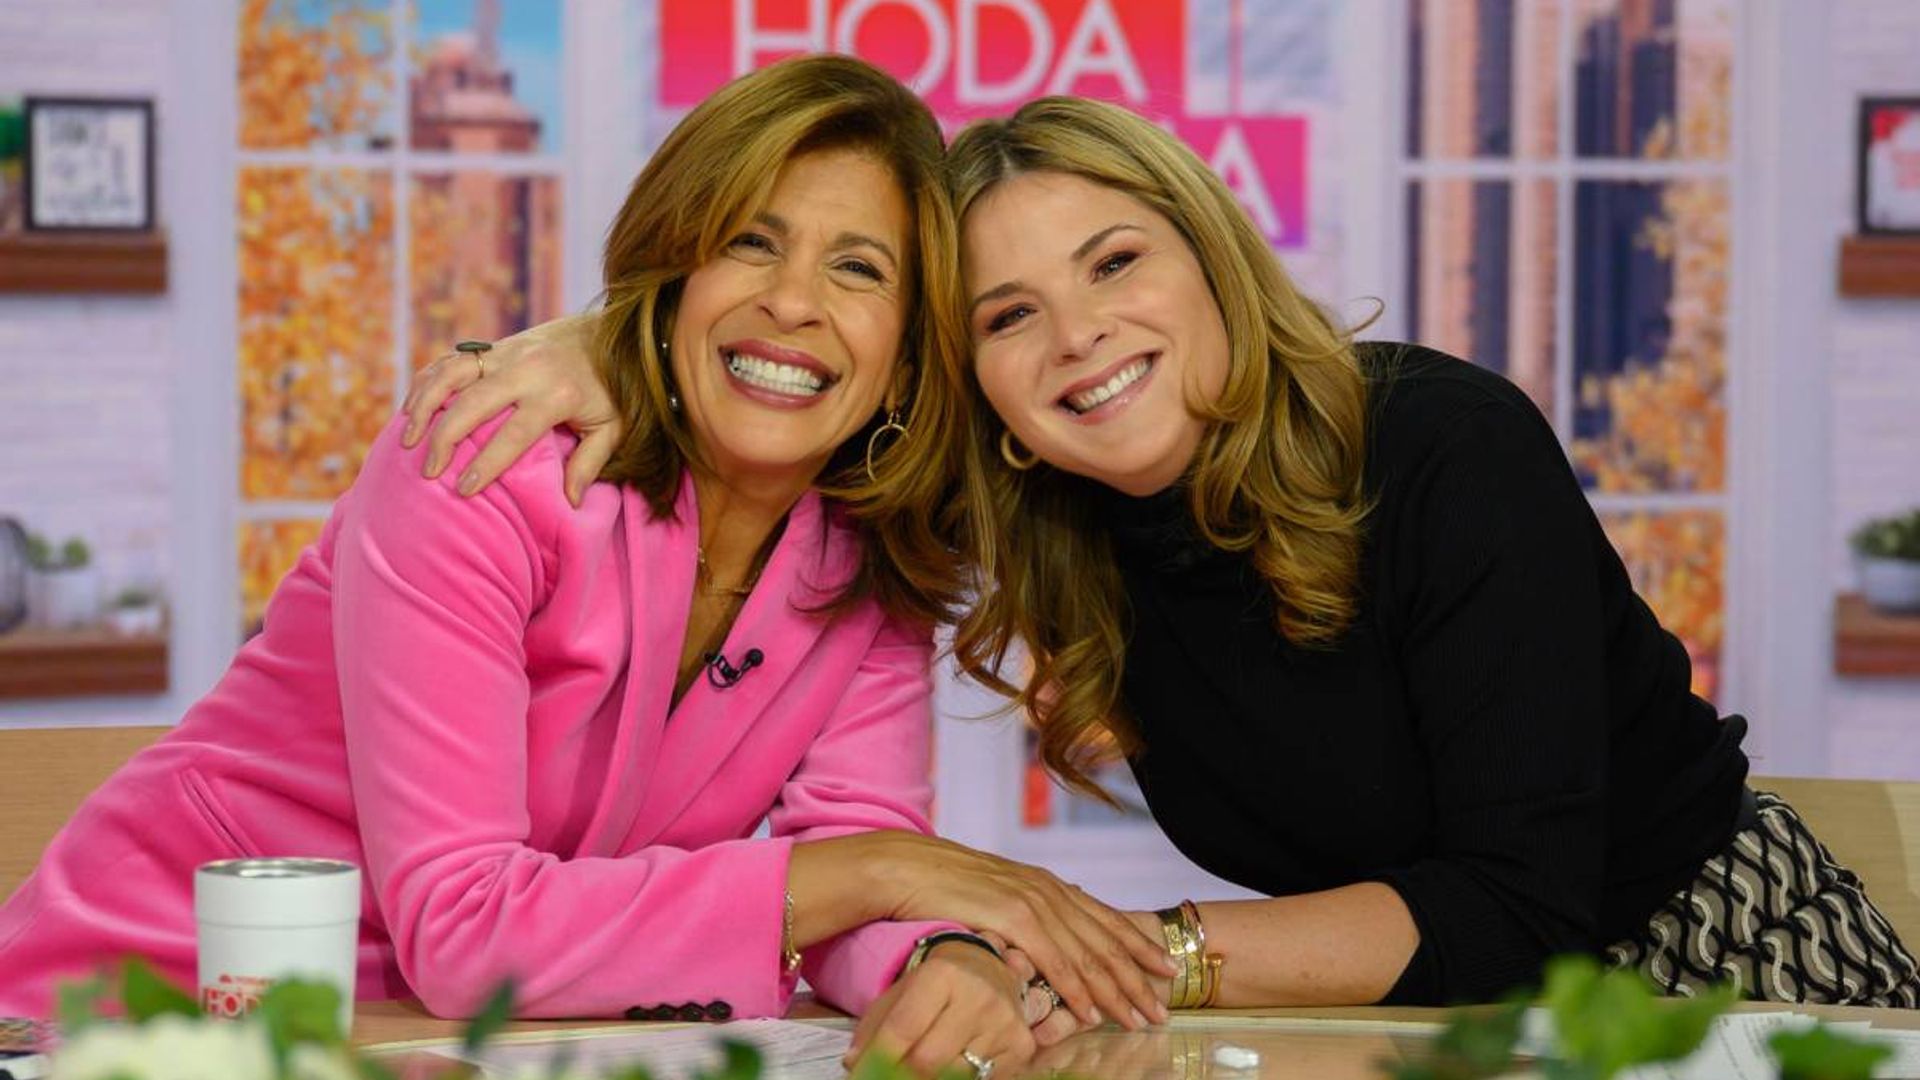 today-hoda-kotb-replacement-co-star-revealed